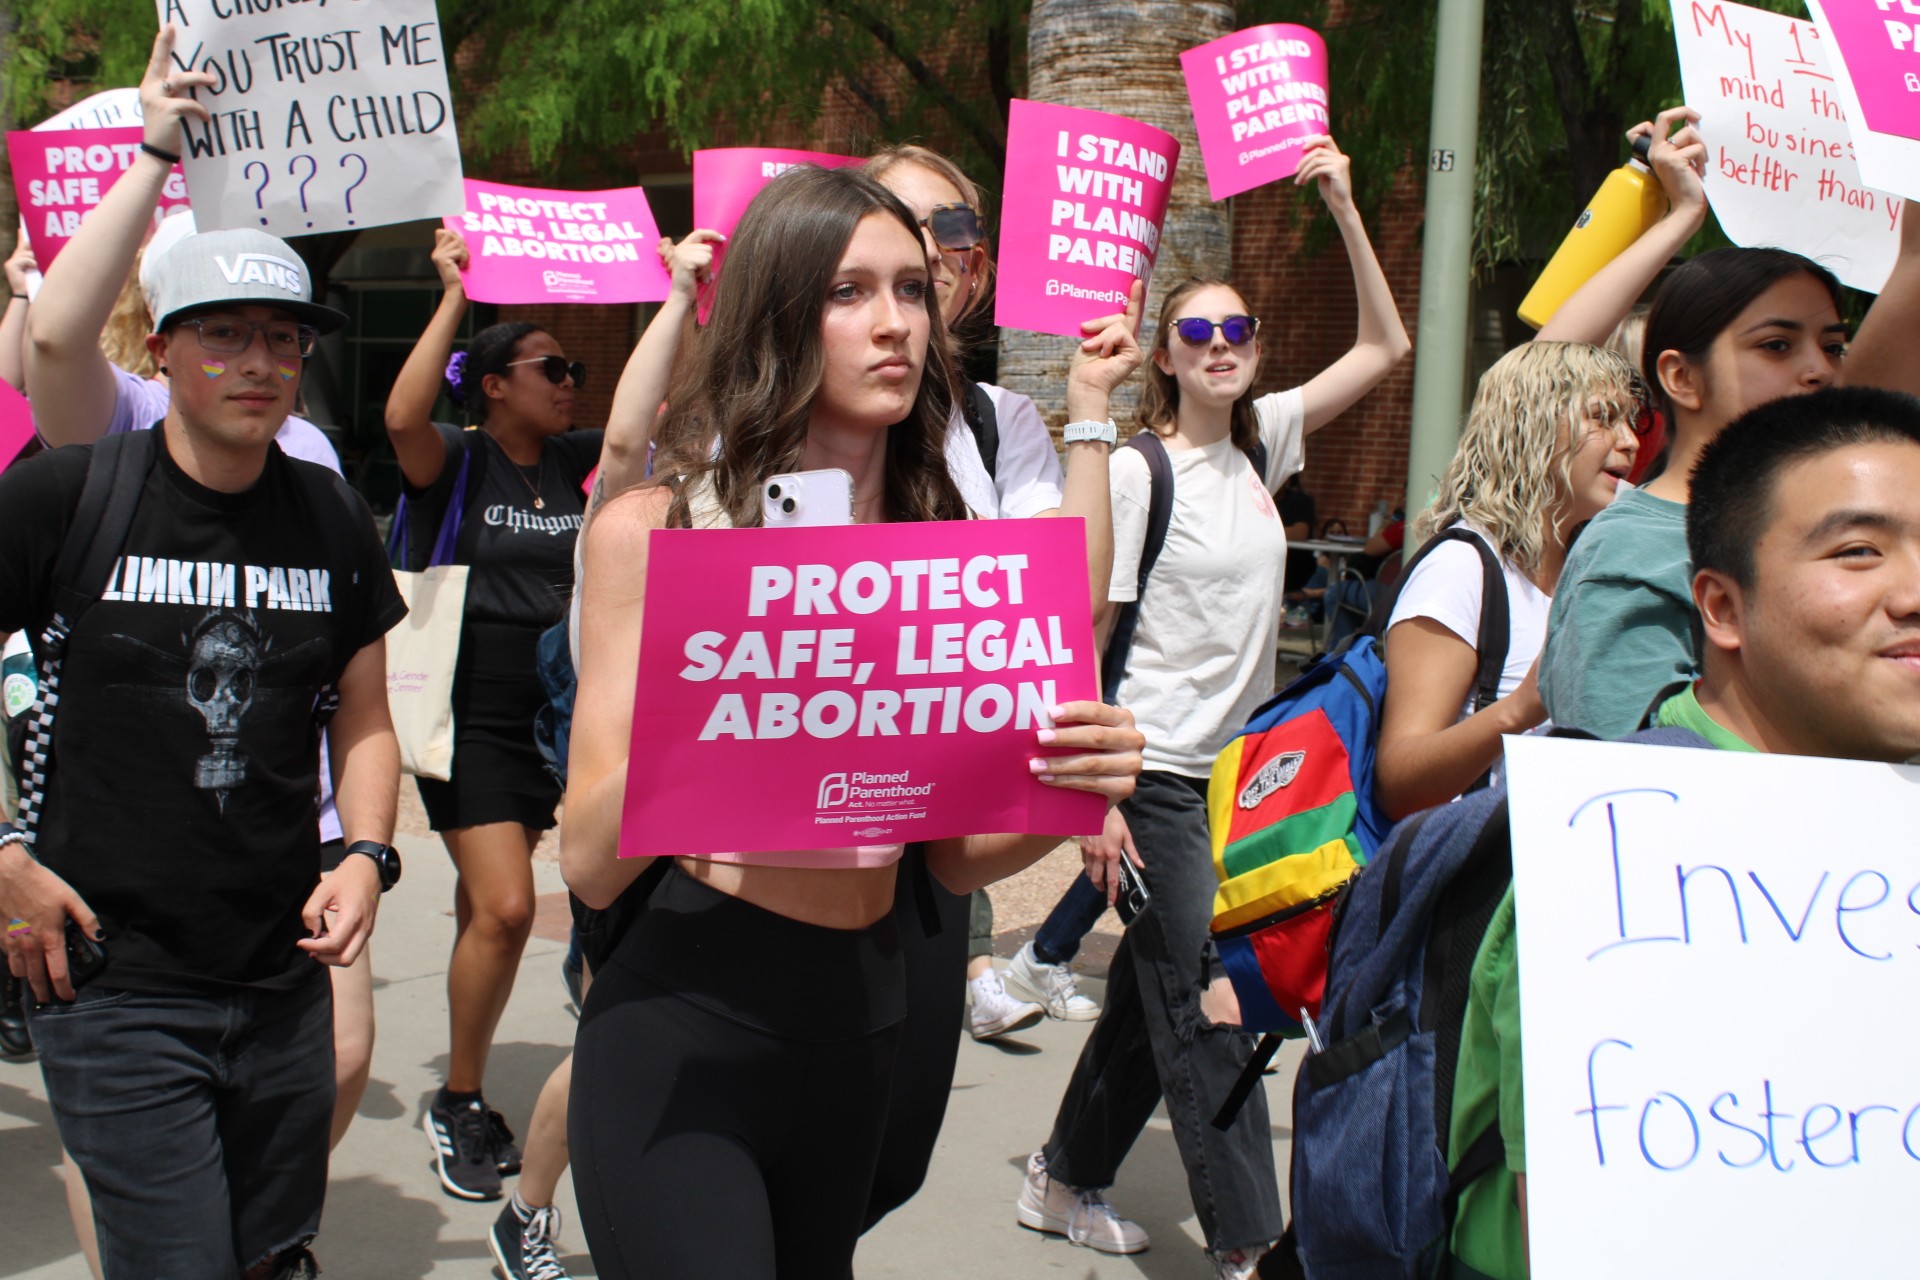 A crowd of University of Arizona students and community members march along the middle of campus, holding signs in support of pro-choice on Thursday, April 13. The protest was held to counter the anti-abortion group that set up a demonstration on the UA Mall for two consecutive days displaying large, graphic images of blood and dead people.